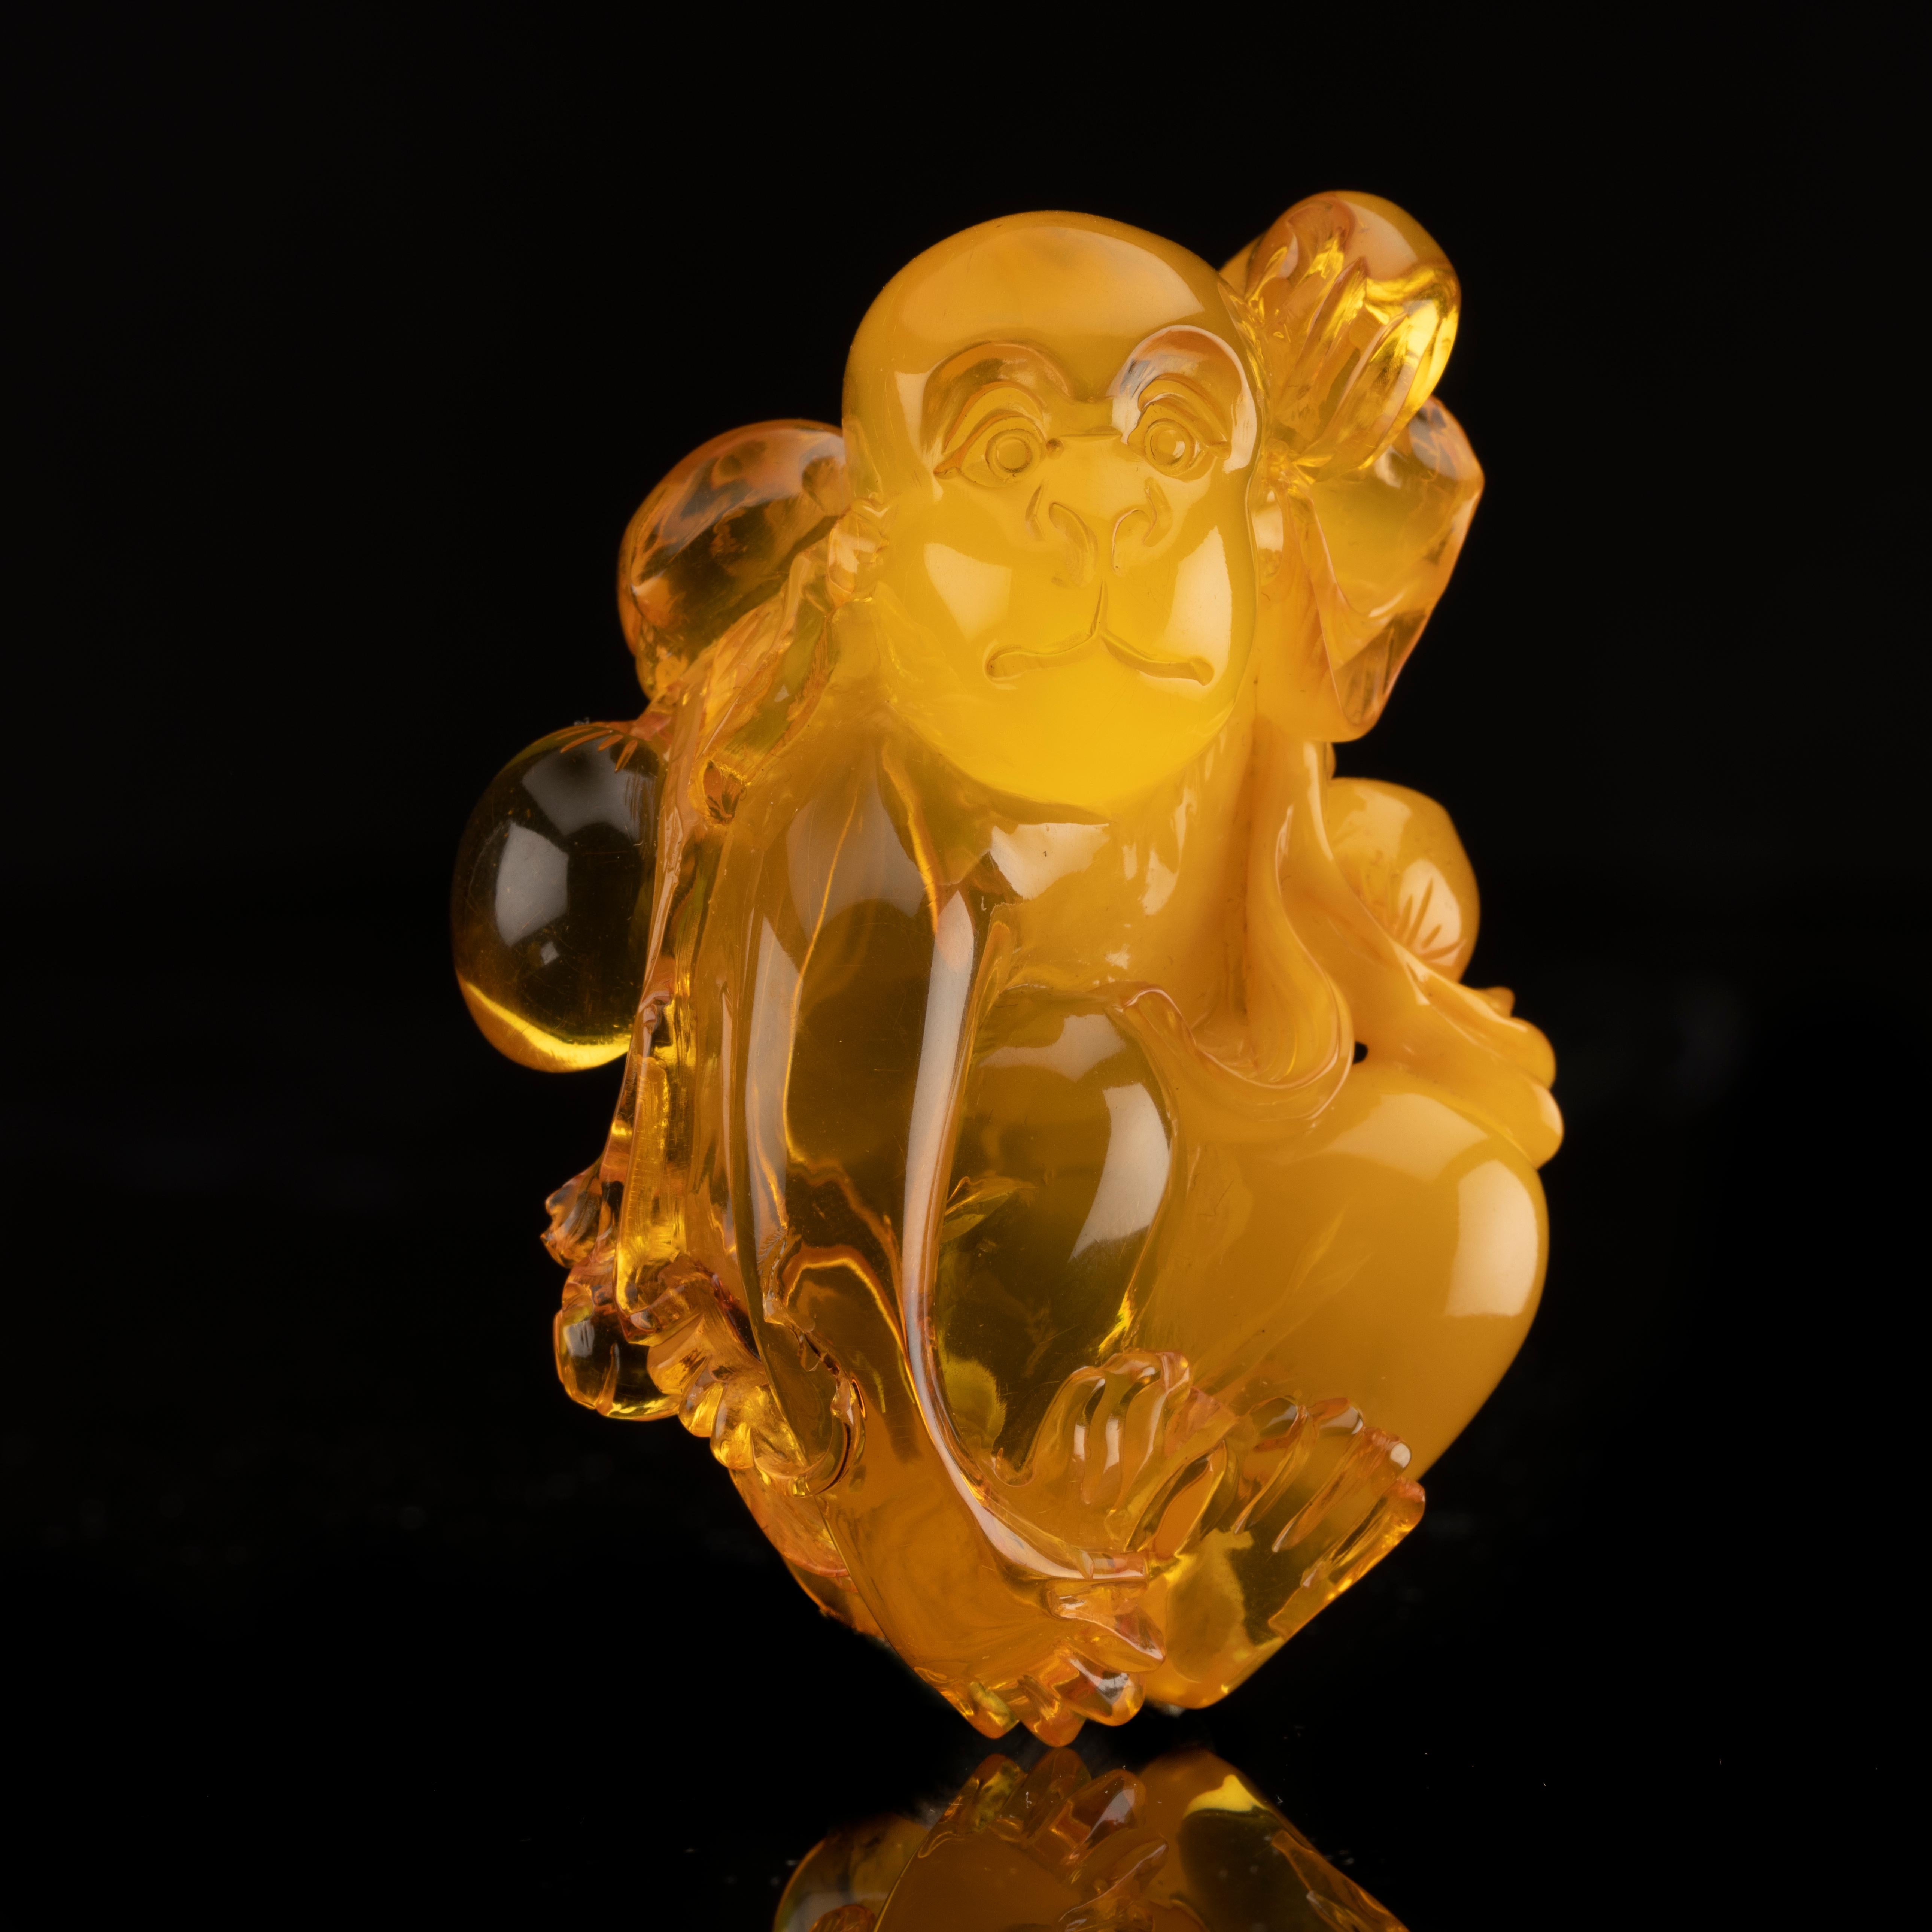 This impressively hand-carved monkey is made out of one piece of excellent quality Baltic amber from Ukraine. He features lovely clarity and luster and exquisite detail. A beautiful addition to any collection. The cube in the picture measures one